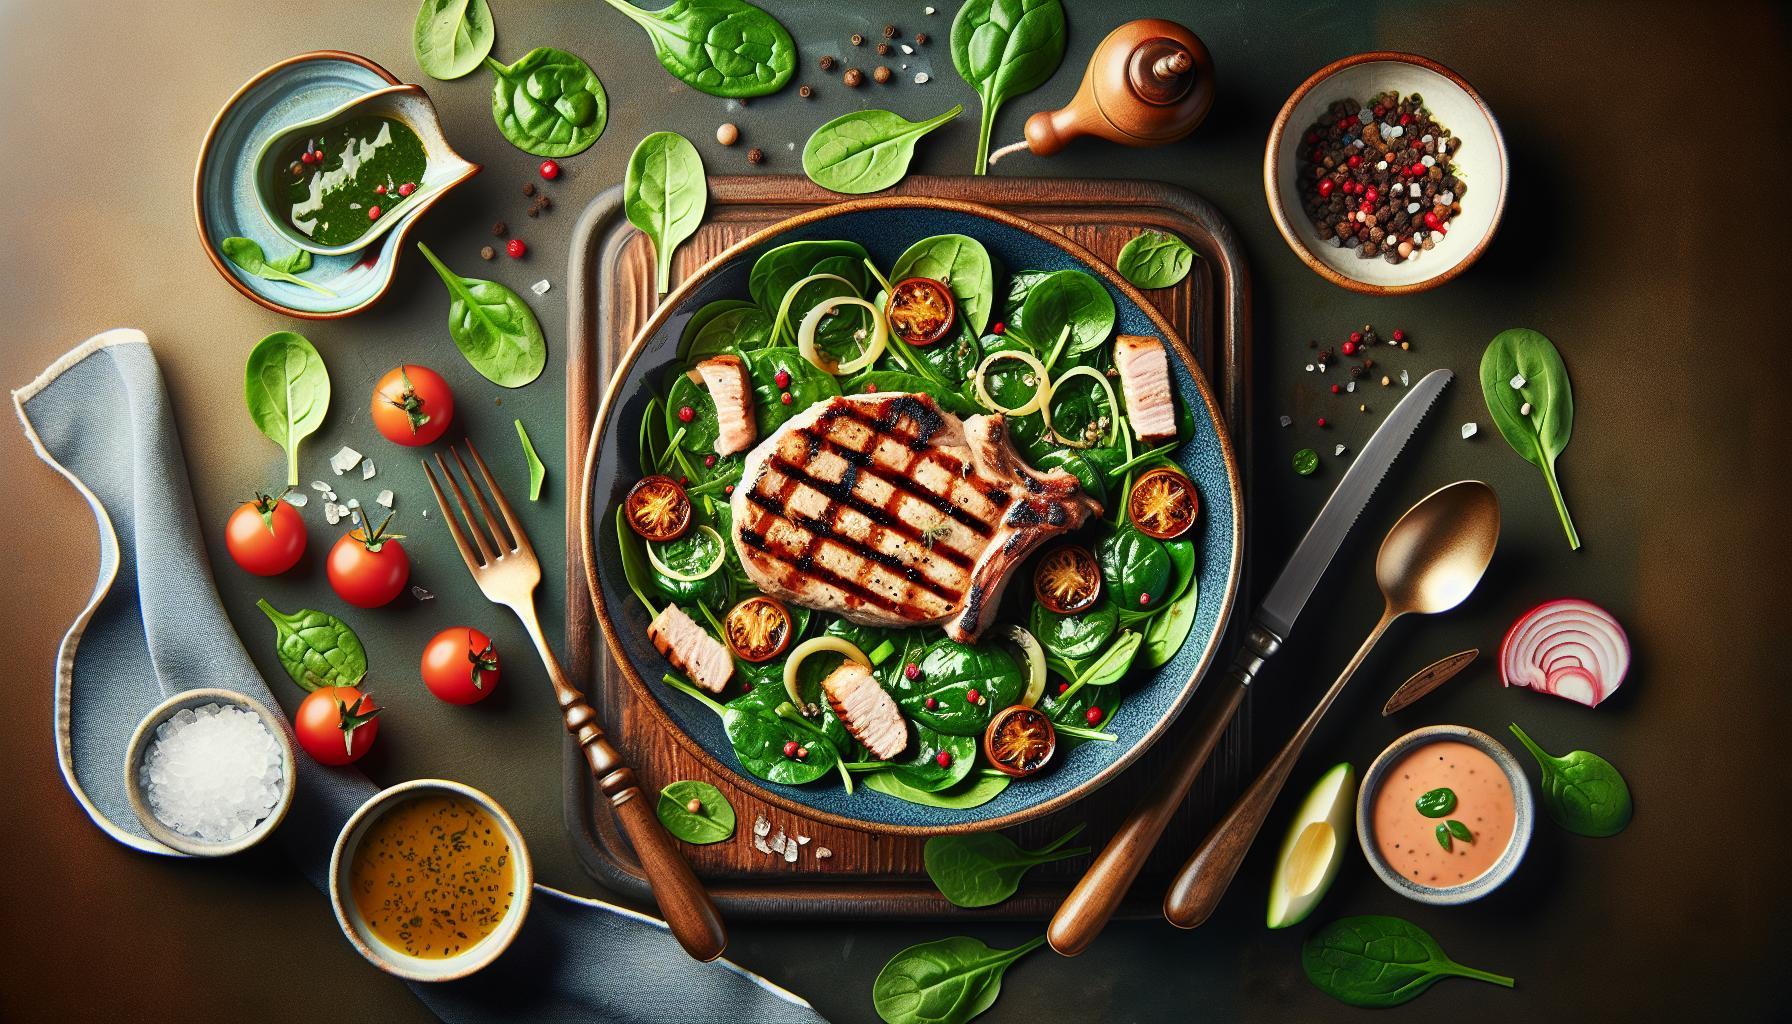 Juicy Grilled Pork Chop and Fresh Spinach Salad Recipe: A Perfect Healthy Dinner Option!